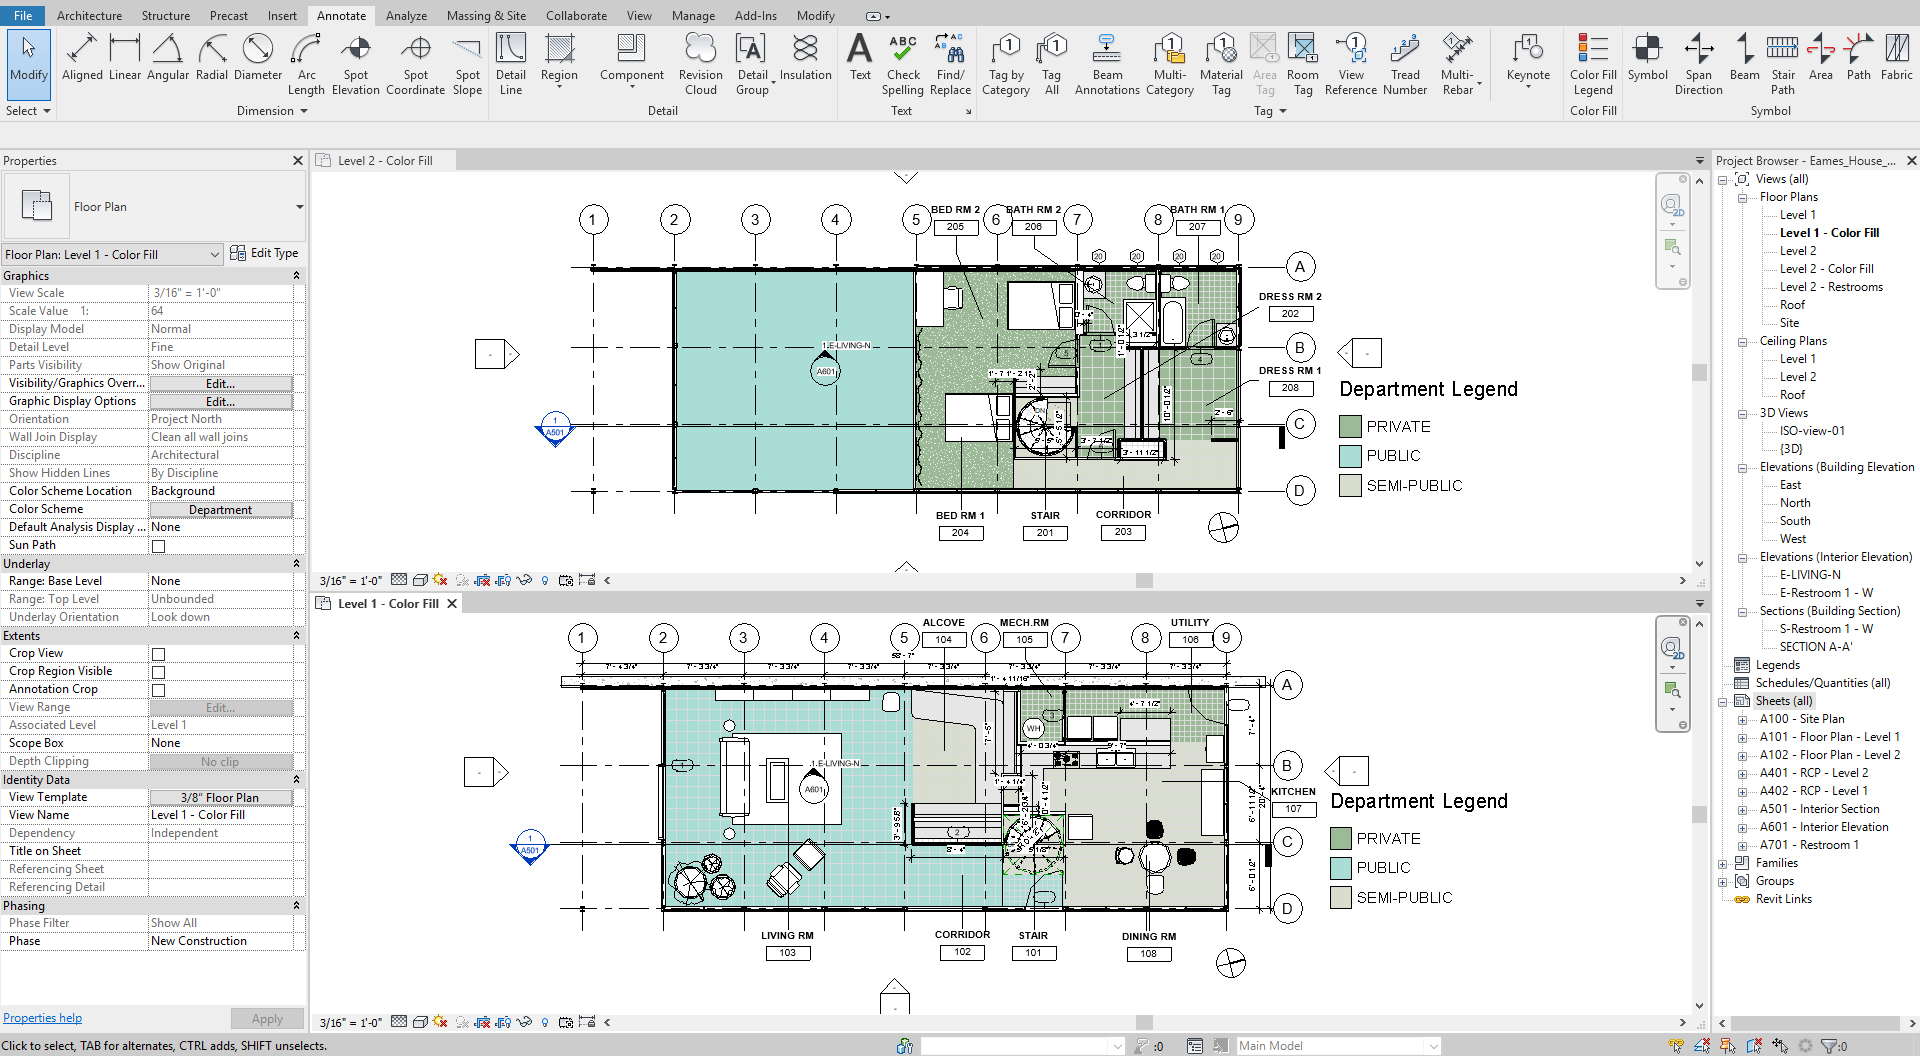 This image shows the resulting image after apply the color-fill on the plans.